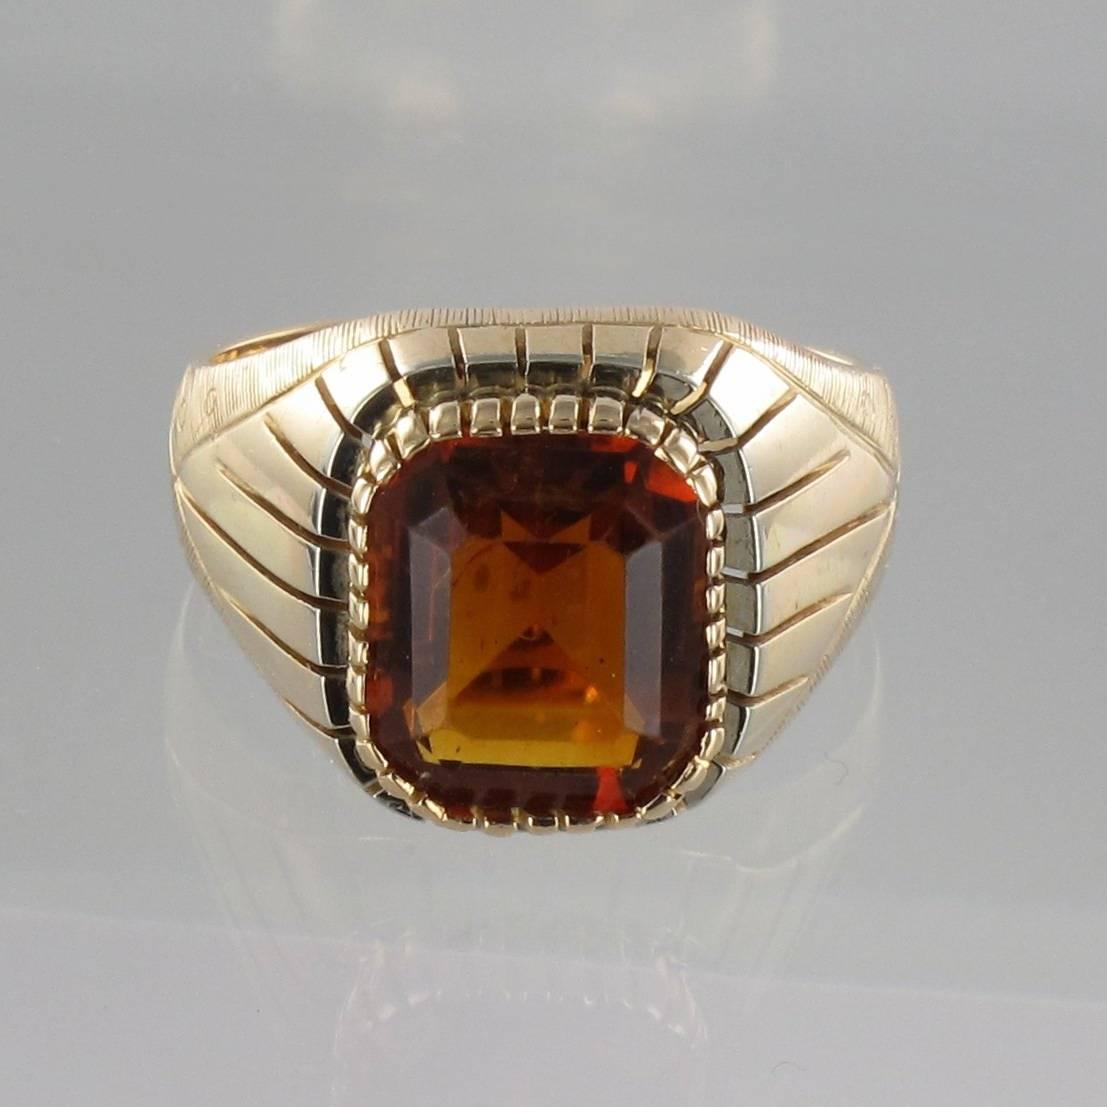 Ring in 18K yellow gold ring.

This beautiful women’s gold signet ring features a splendid quartz haematoid centrepiece with intense contrasting yellow and orange shades. The clawed setting displays fine and detailed crimping work and the